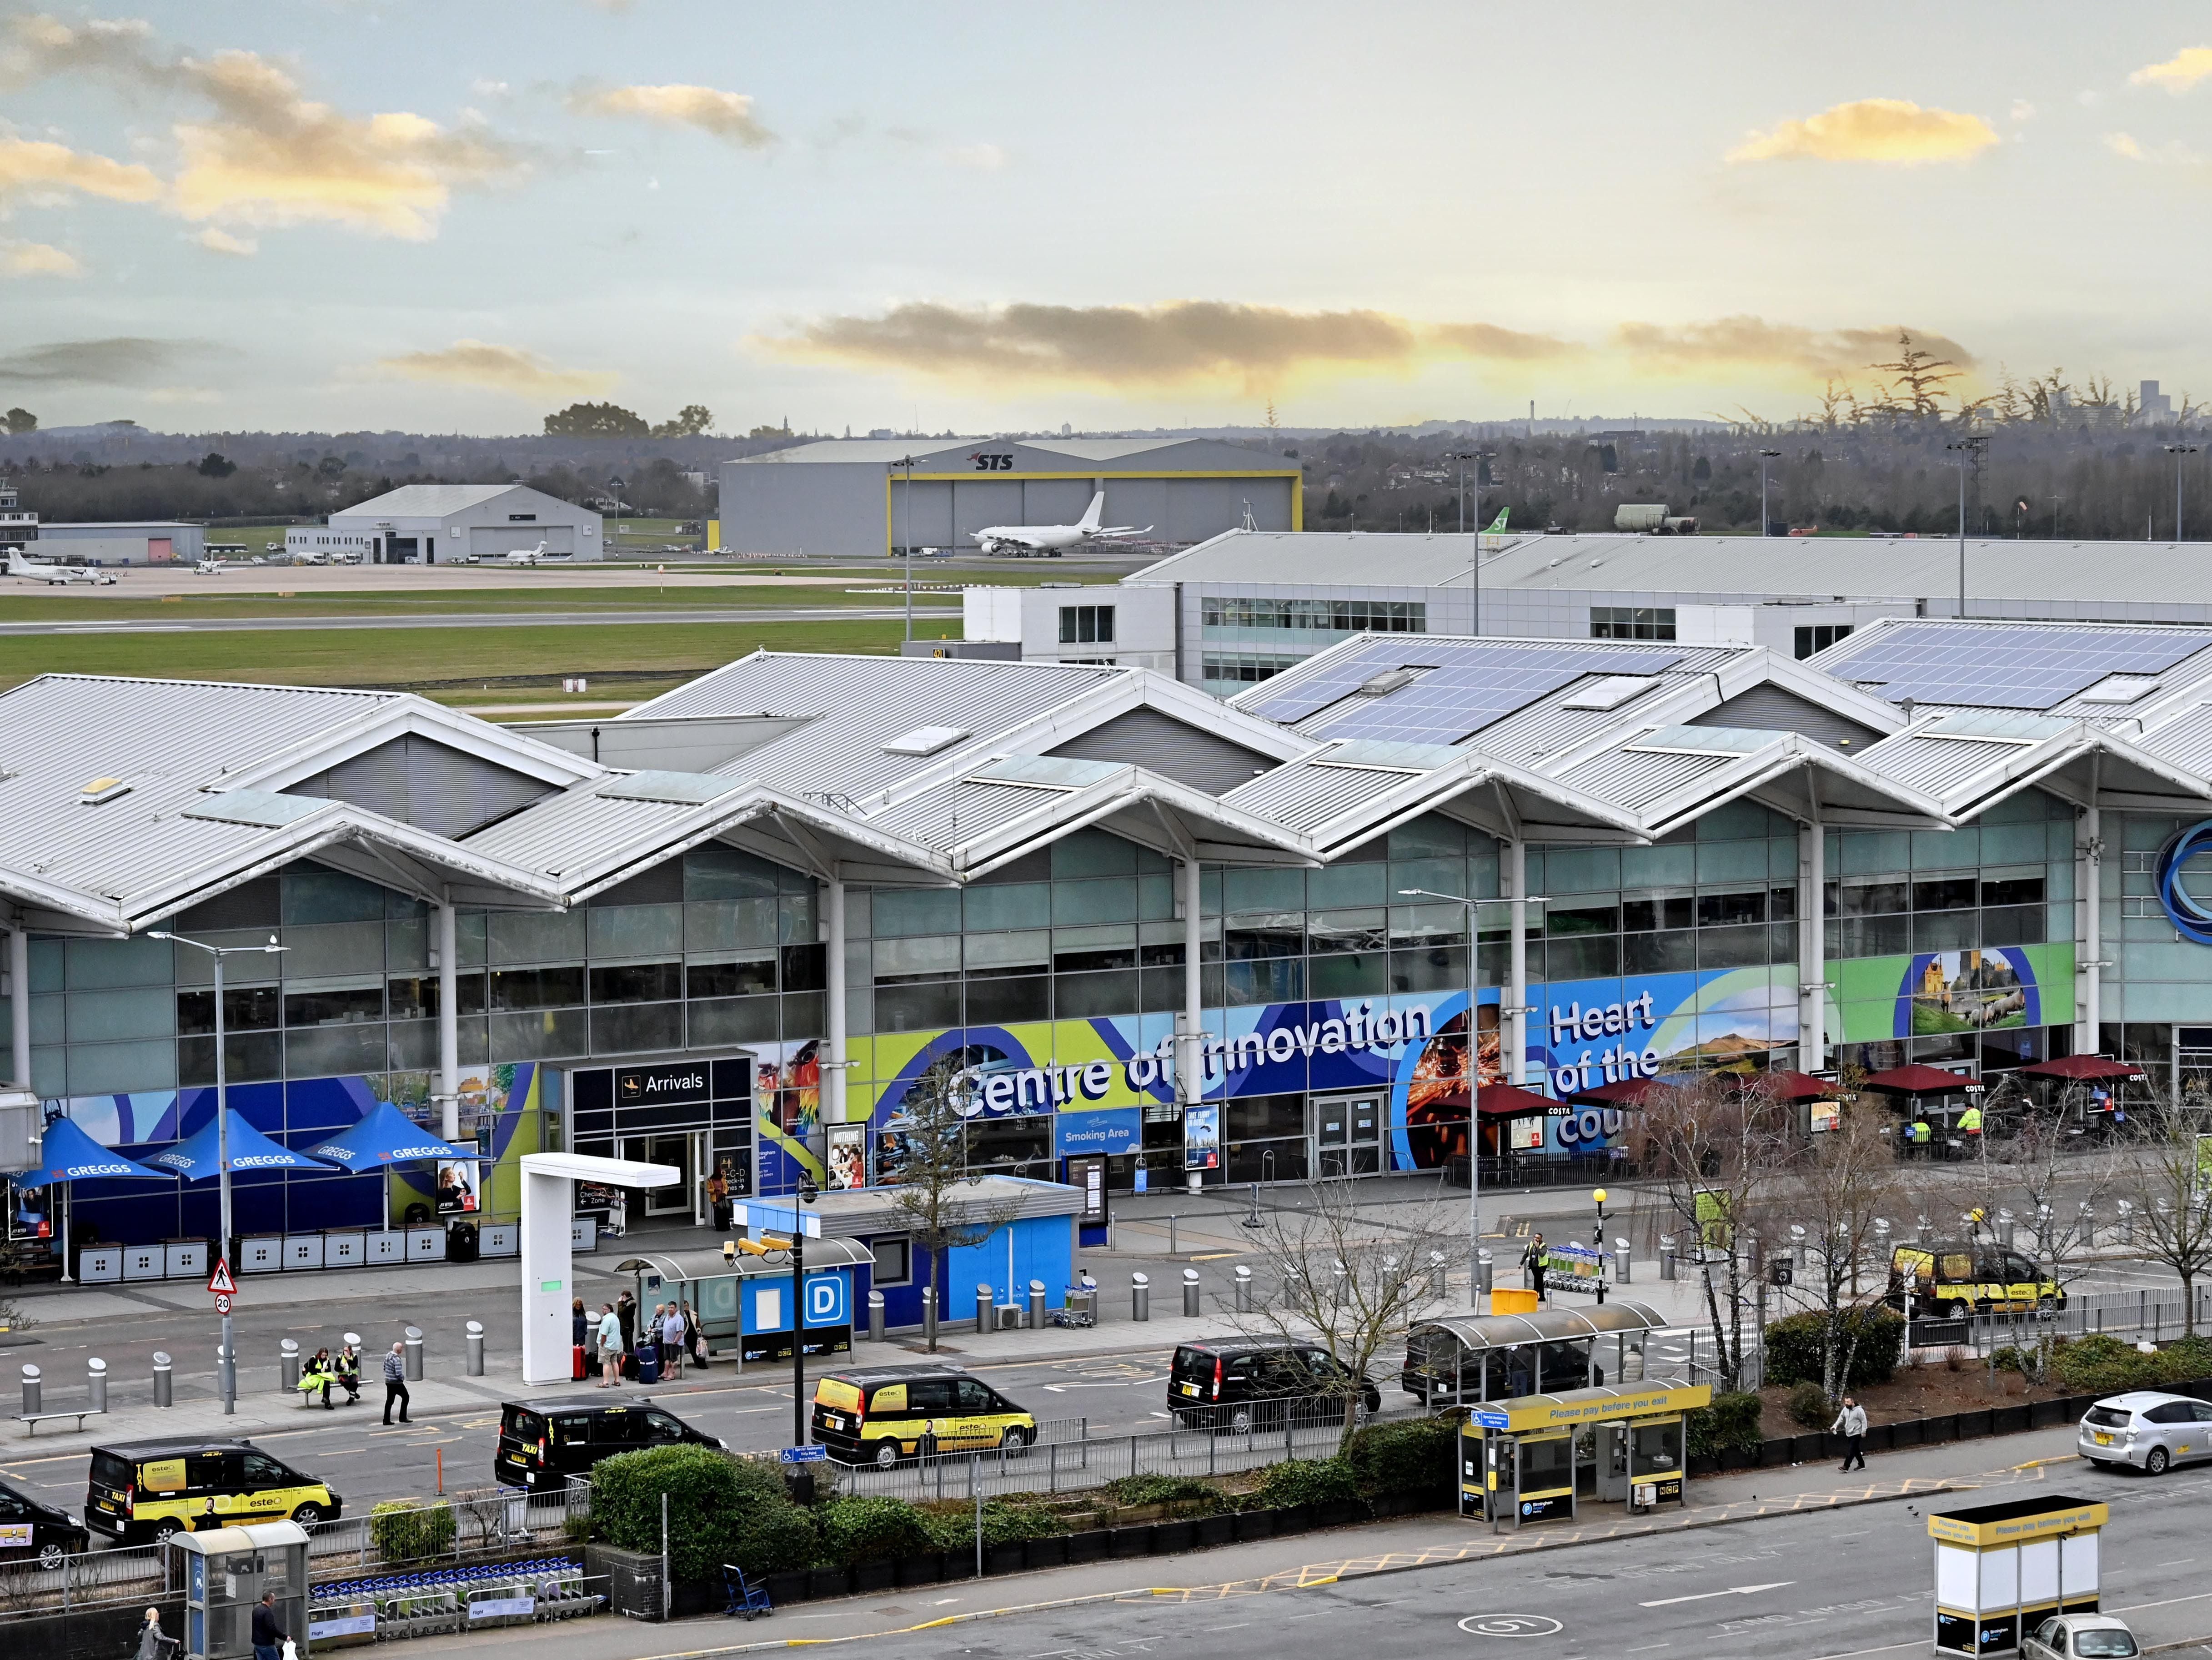 Birmingham Airport is UK's fourth most expensive for a week's parking - study